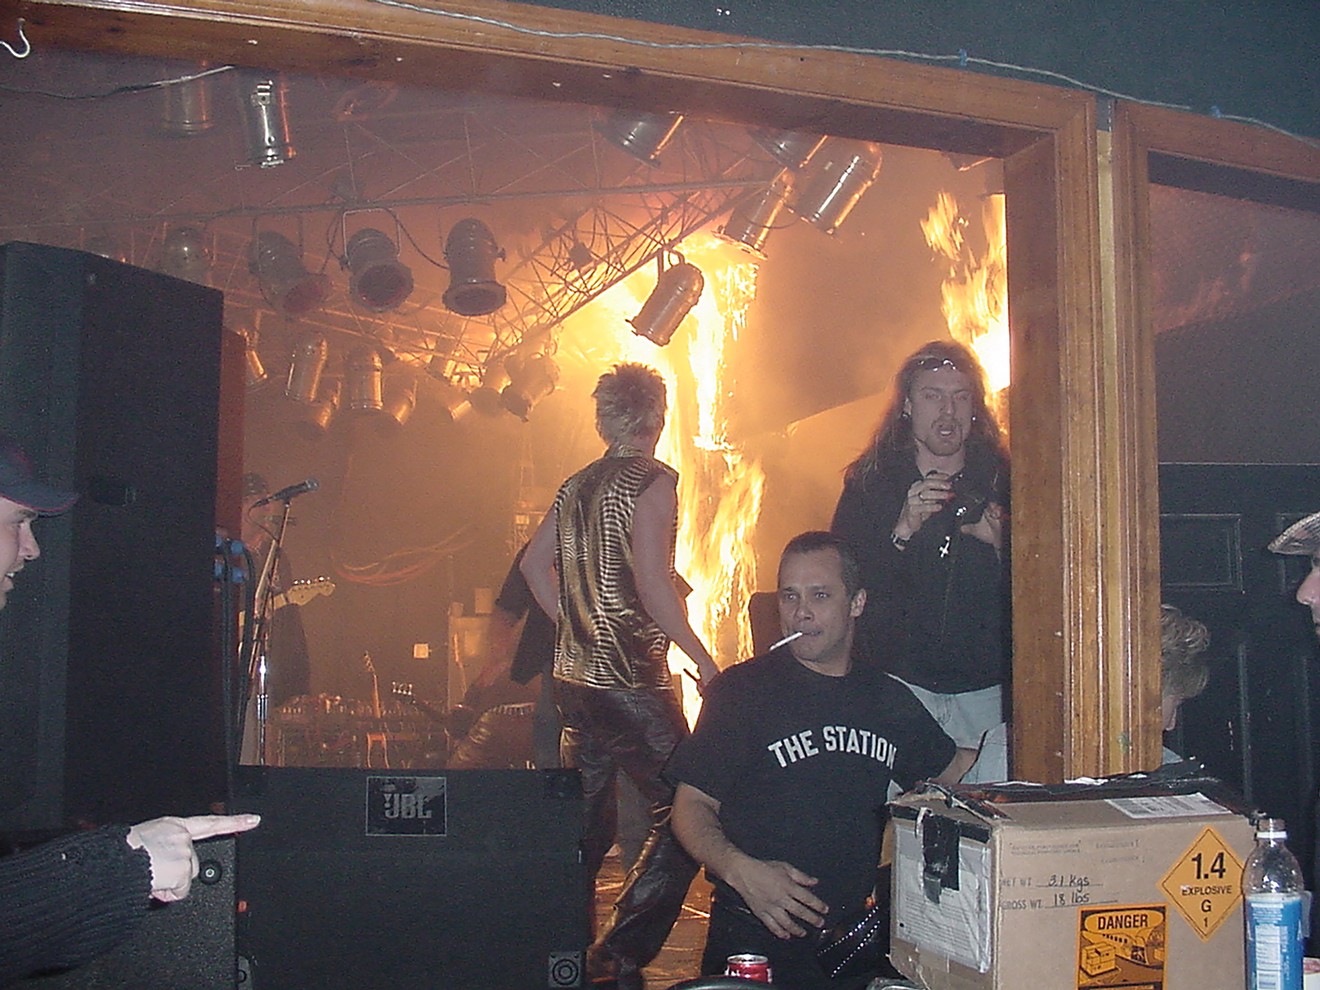 Twenty-five seconds after the first flames, fire reached the ceiling at the Station. Great White tour manager Daniel Biechele (upper right) lit the pyro effect. Note the "Danger" and "Explosive" stickers on the fireworks box.